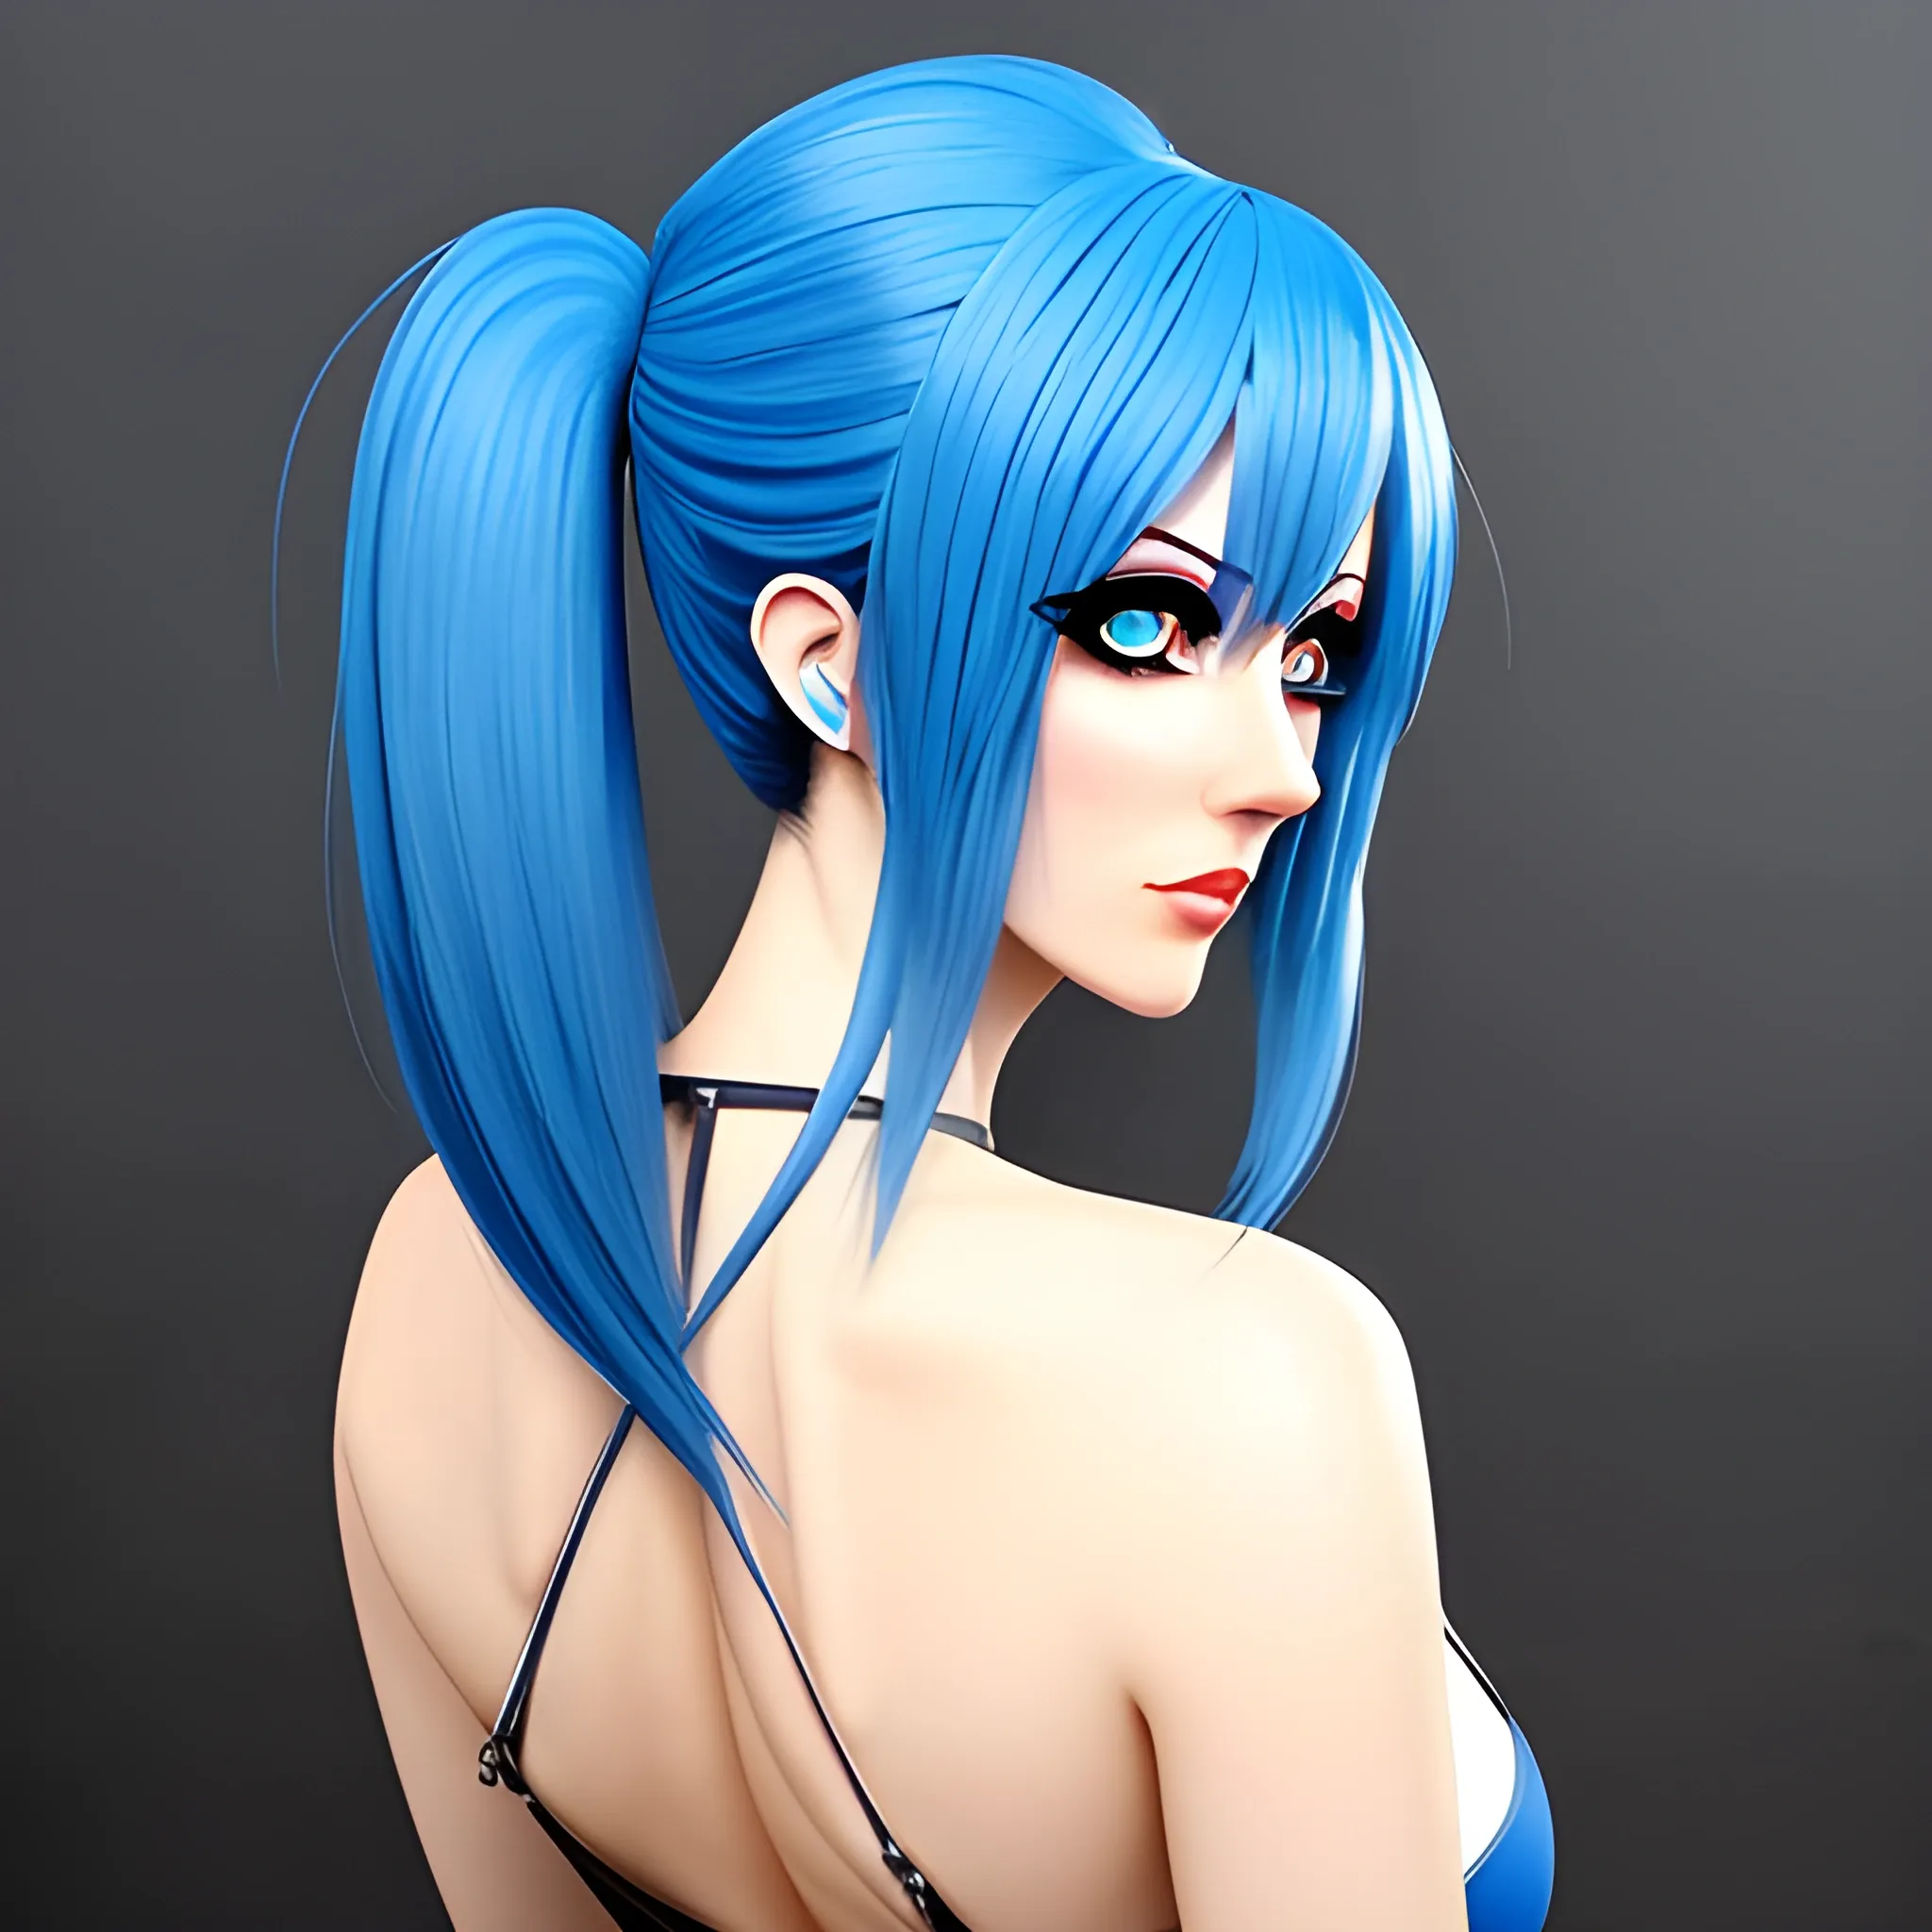 Girl Big eyes, blue hair, back view and head 3/4 , girl anime , no more fingers, no more arms and foots, Have a gun with tactic Simbols
